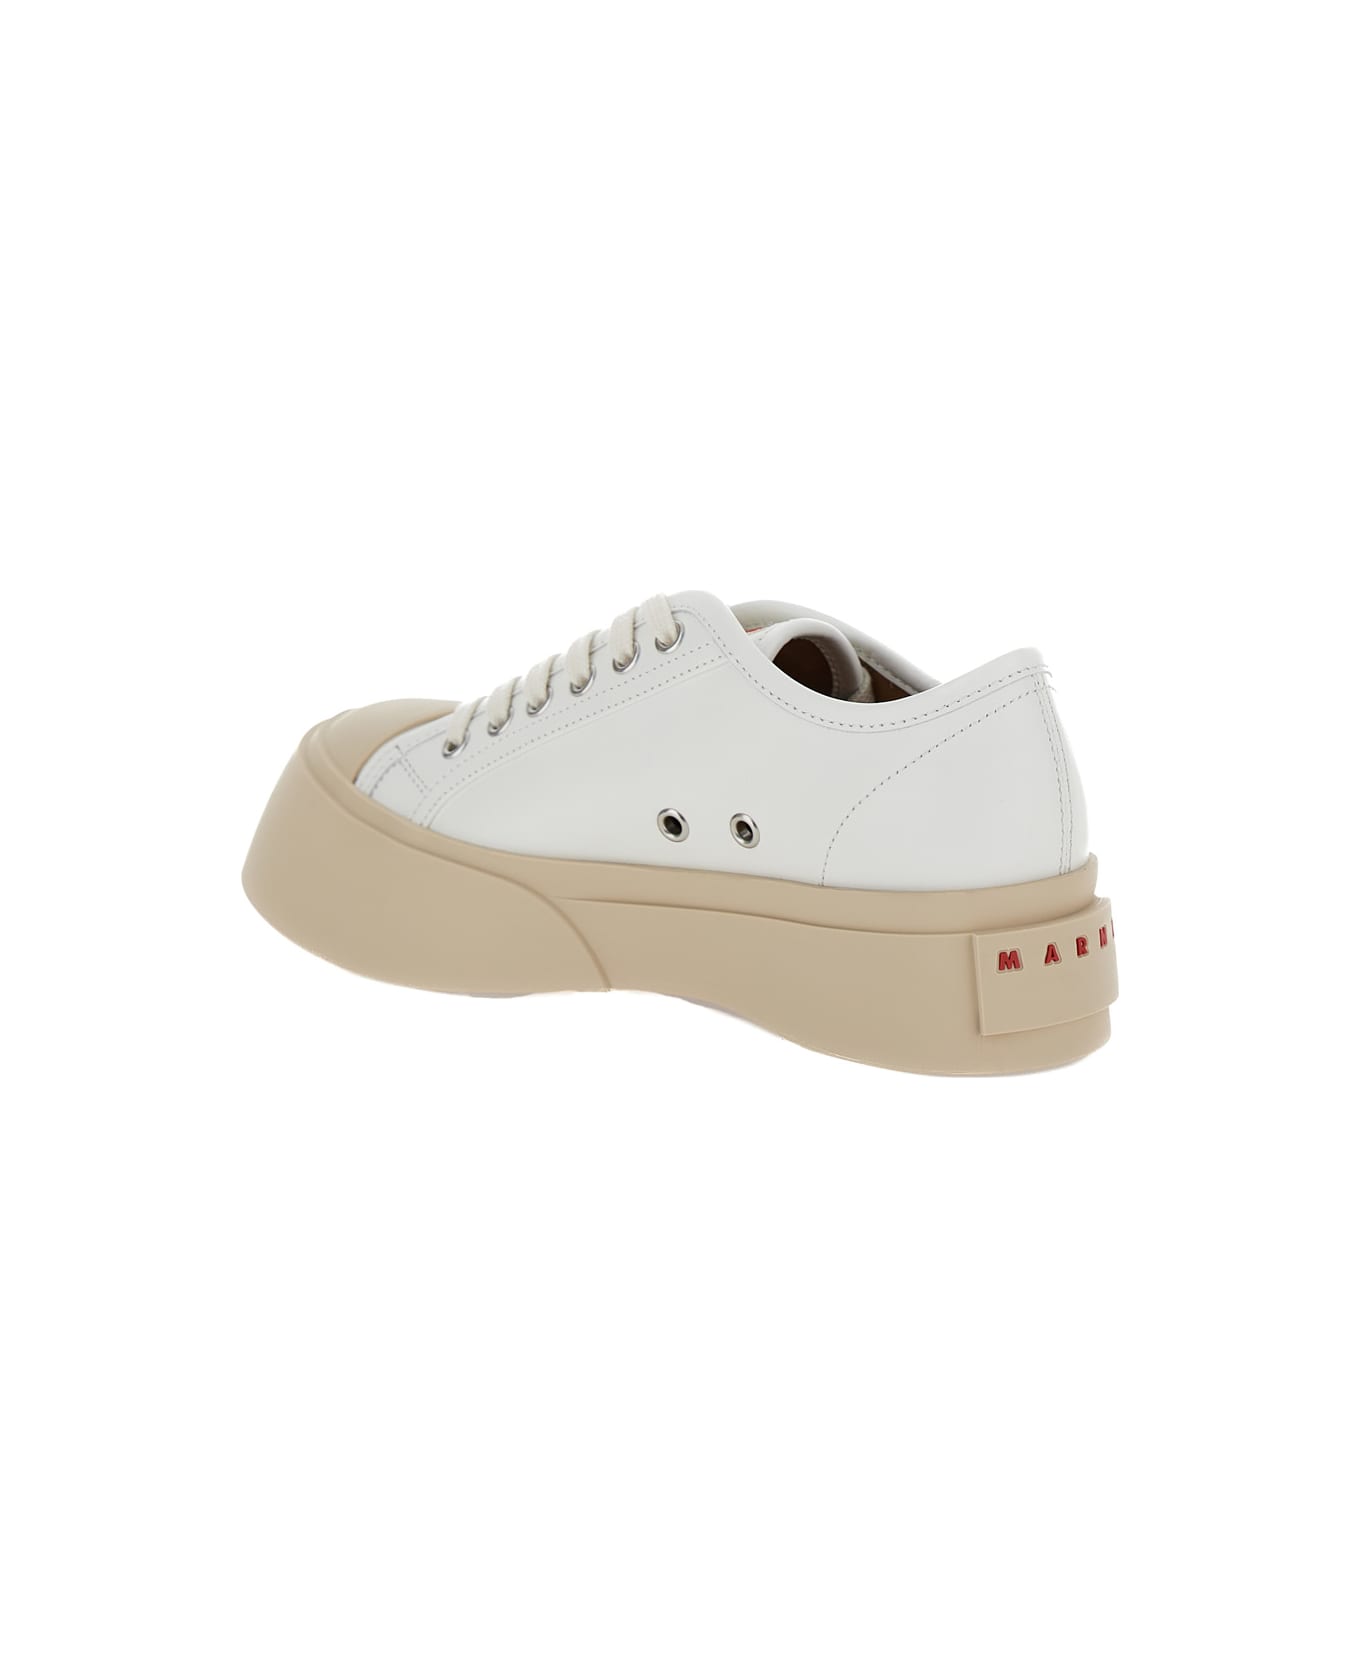 Marni 'pablo' White Sneakers With Lace Up Closure In Leather Woman - White